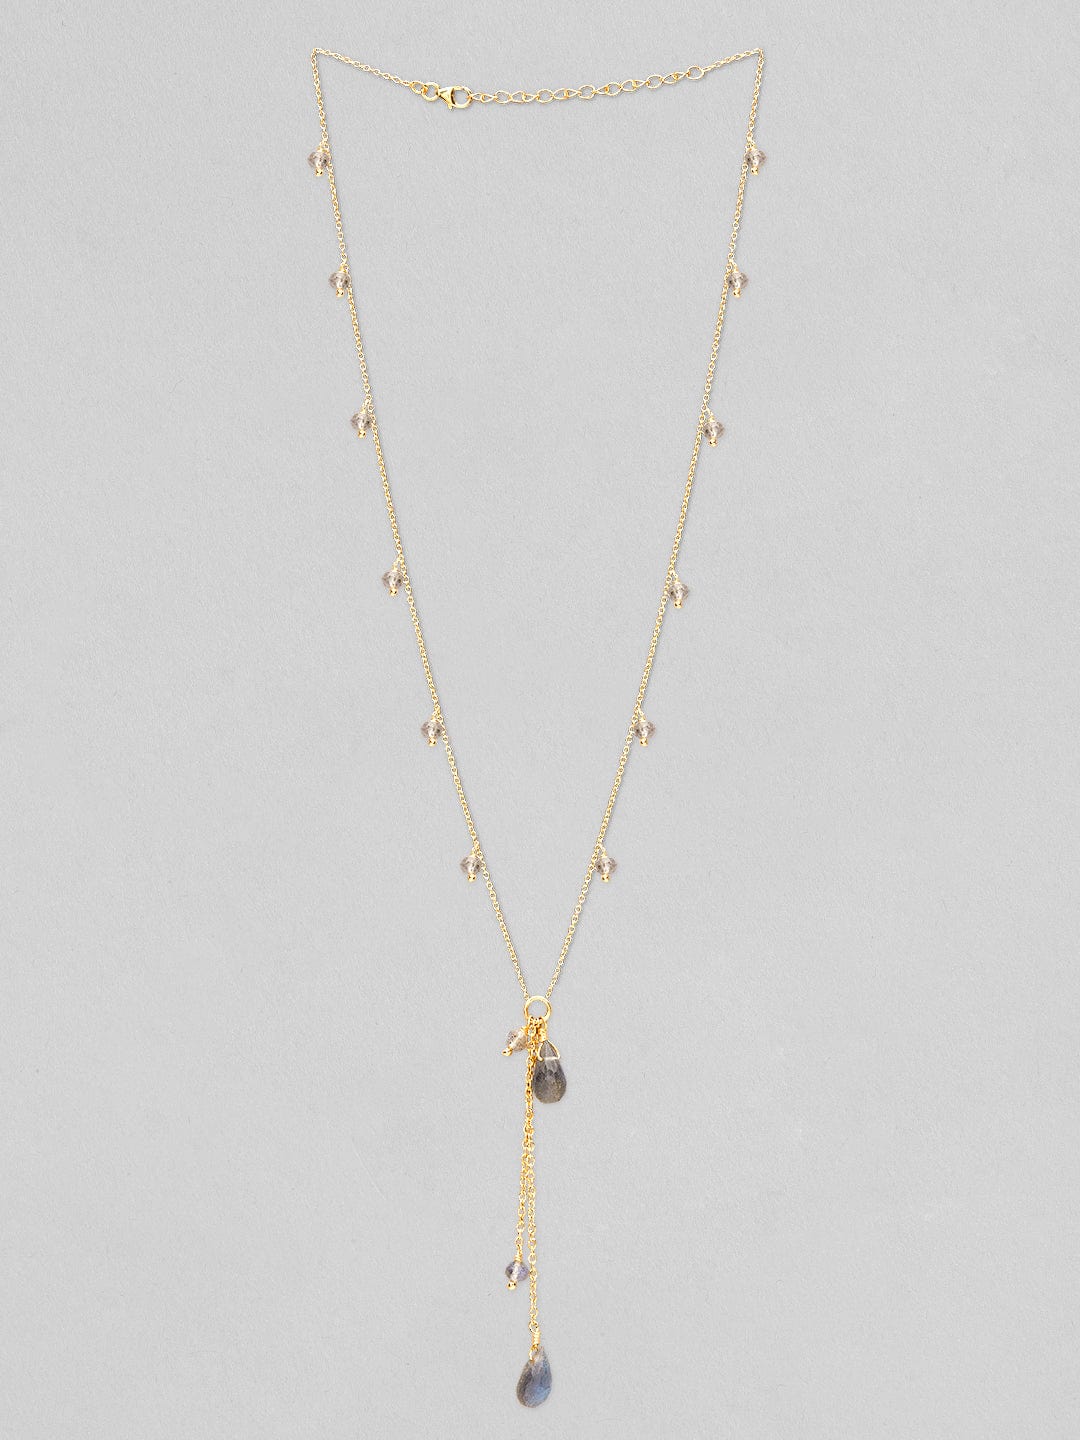 Rubans 925 Silver The Delightful Beads Chain Pendant Necklace - Gold Plated